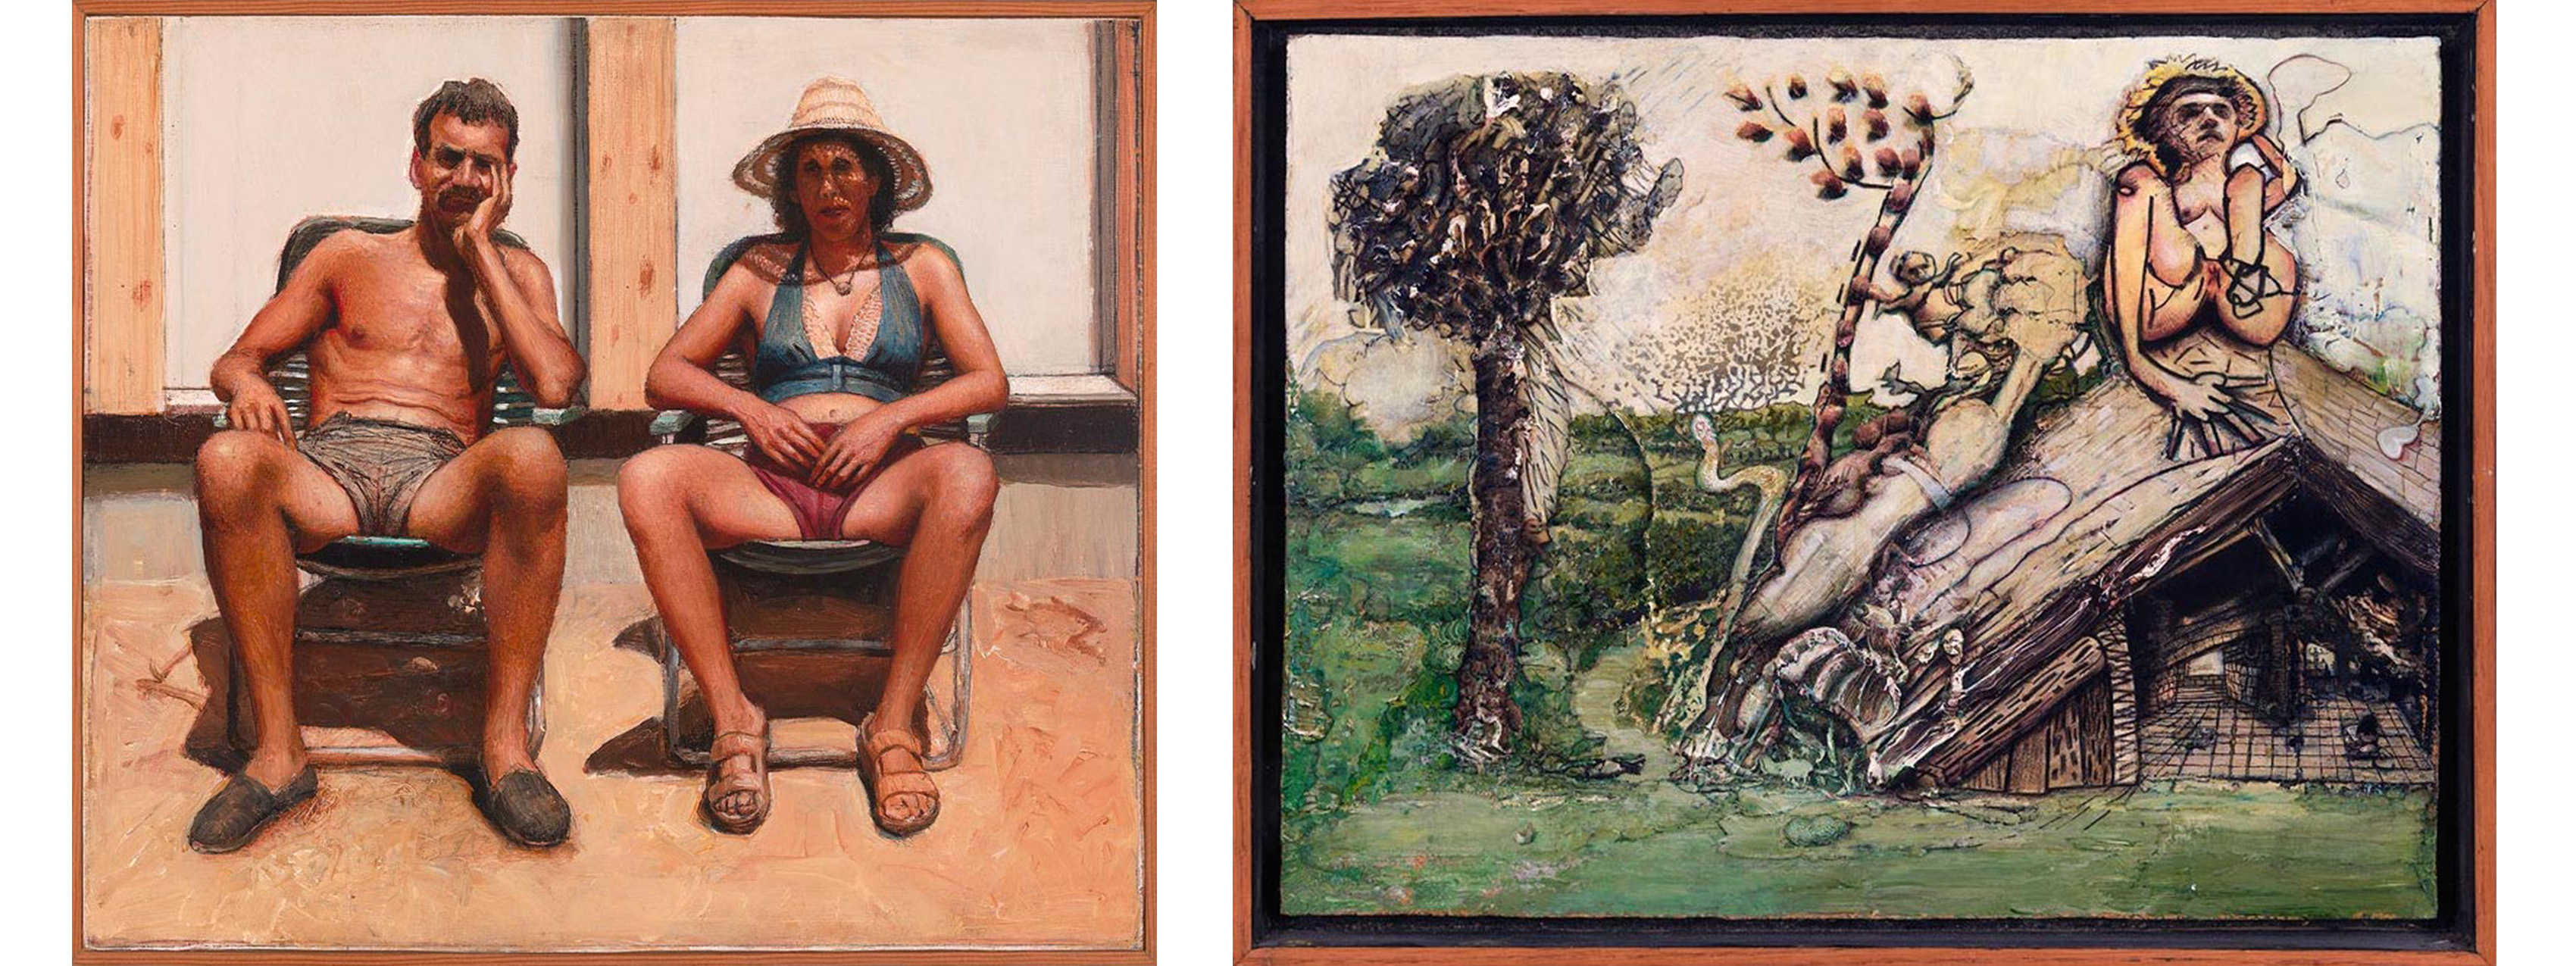 left: couple in bathing suits seated in folding beach chairs on sand in front of white and wood wall, he has his face resting in his hand and she is wearing a woven beach hat. right: green land and water, white sky, large tree at left, snake left of center with another tree with a child holding on to is, woman with large breasts rests on the roof of a very damaged building on right